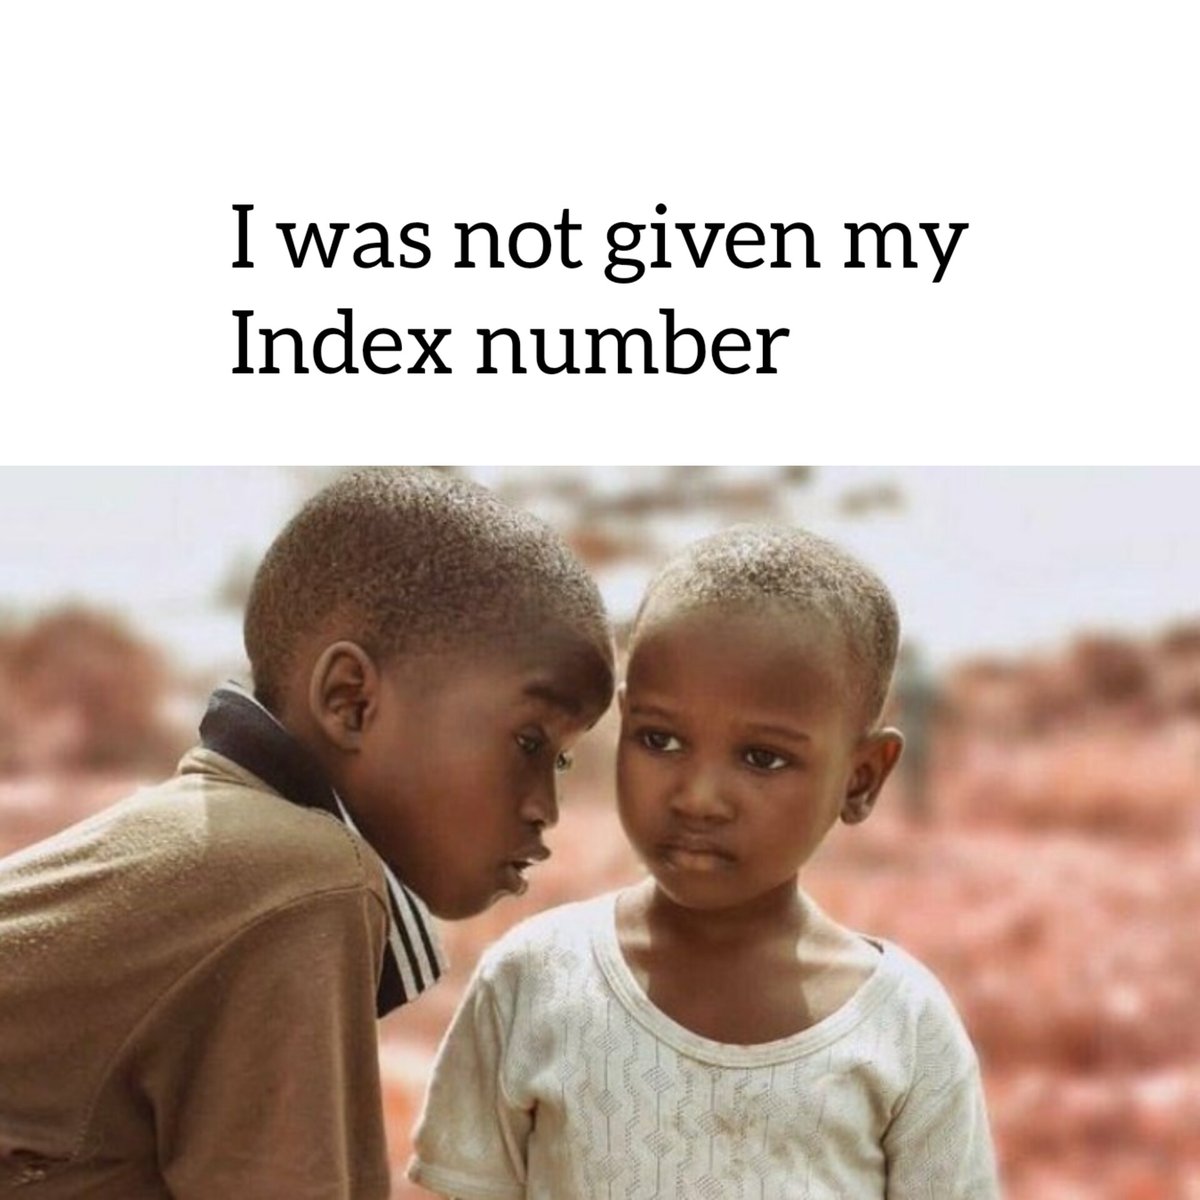 What's your index number 
#UCE2022